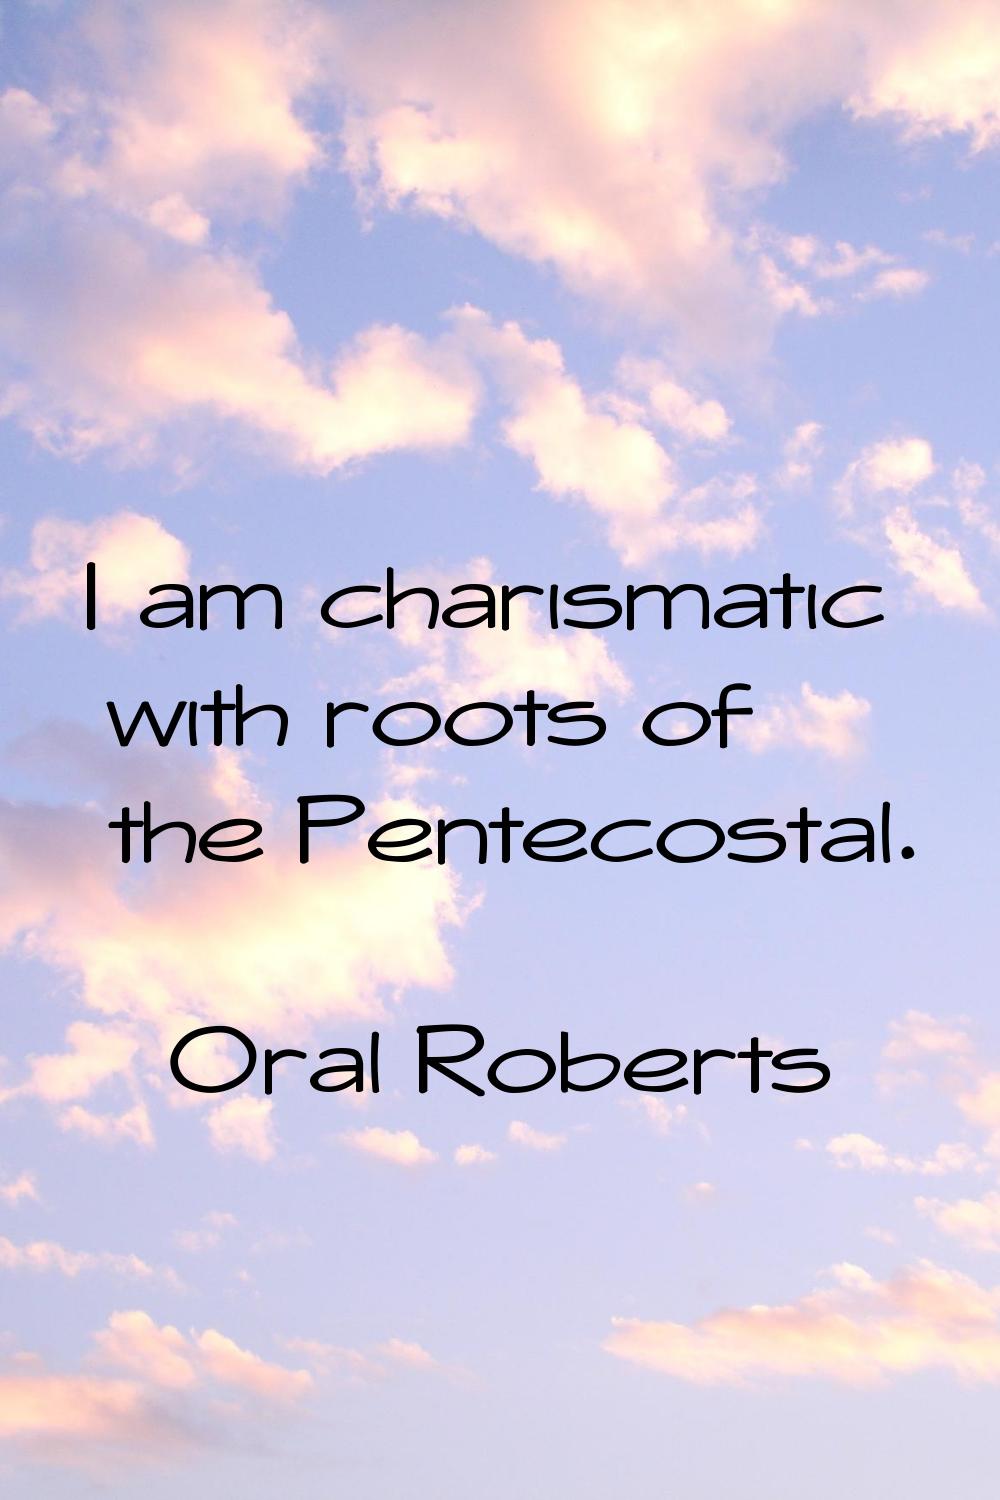 I am charismatic with roots of the Pentecostal.